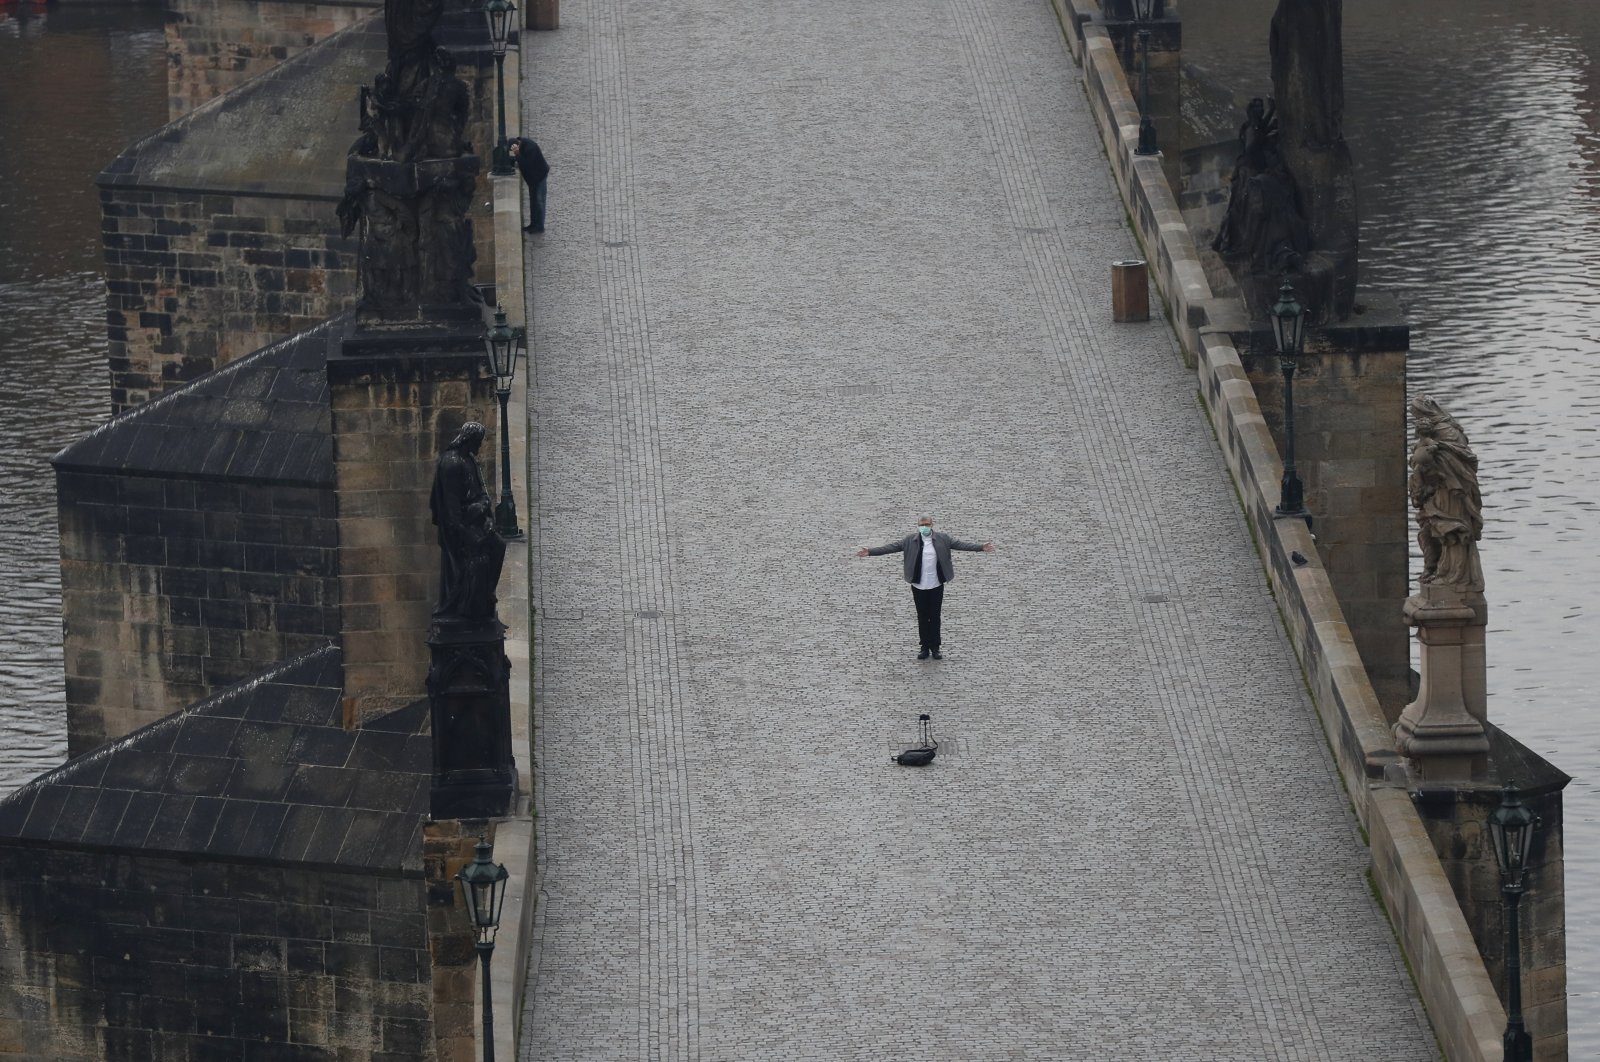 A man takes a selfie on the nearly empty Charles Bridge in Prague, Czech Republic, Friday, March 20, 2020. (AP Photo)